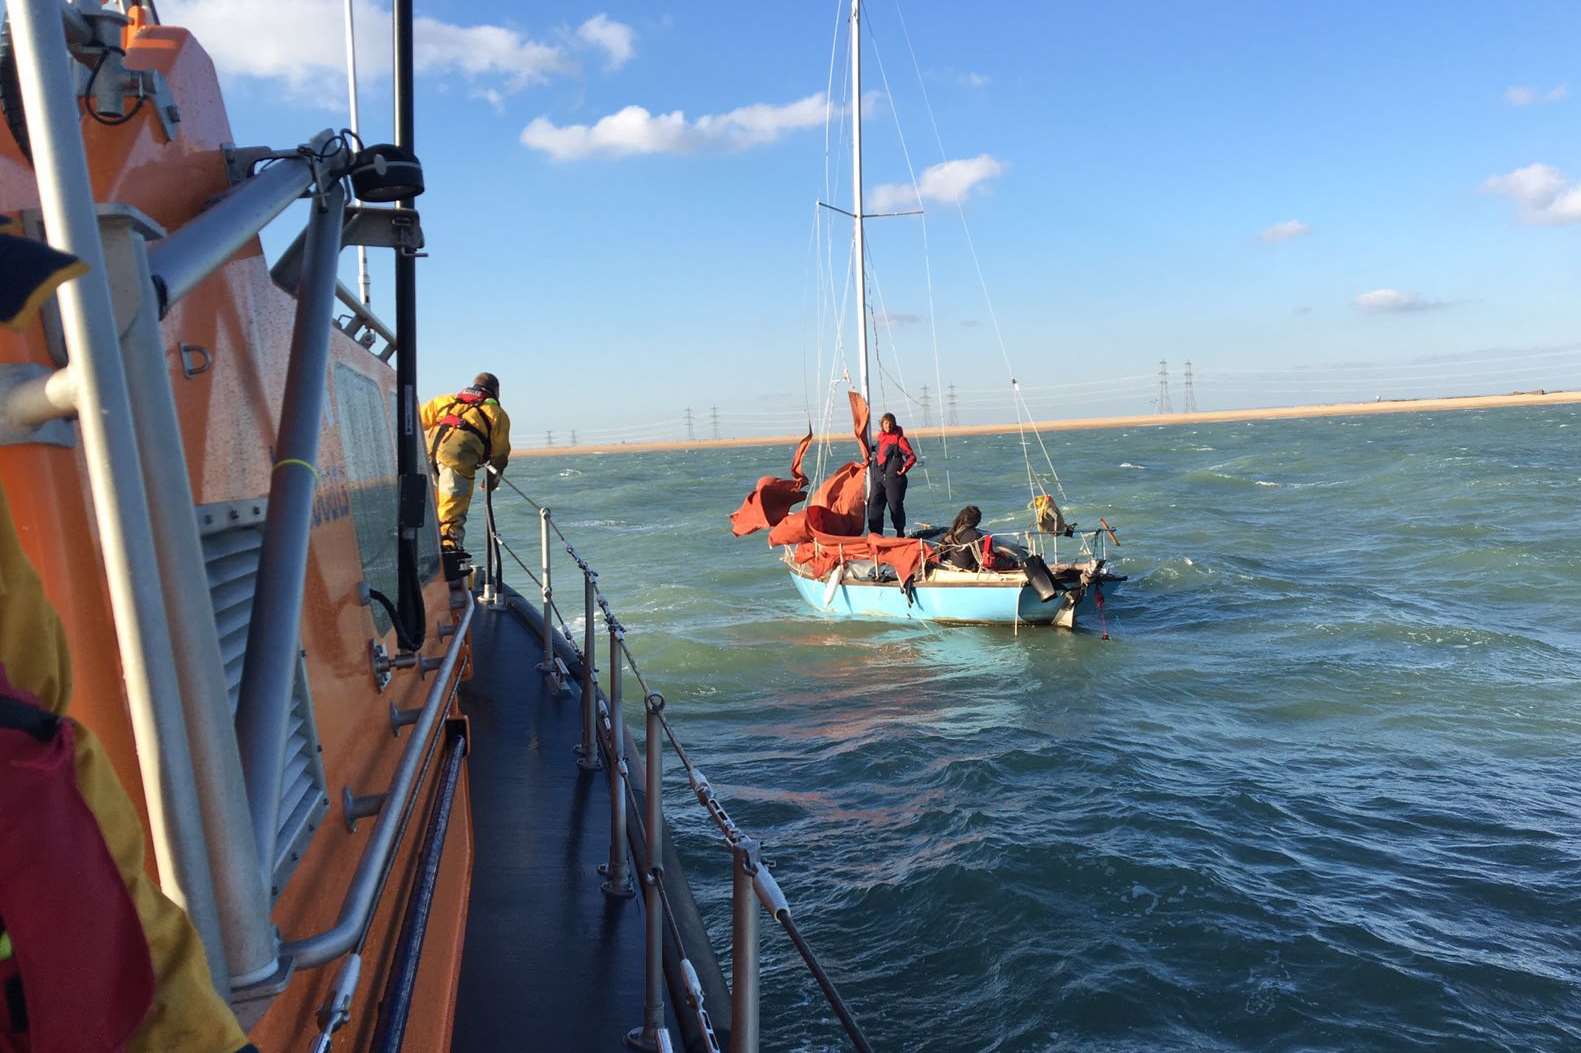 The yacht was rescued after getting stranded in force six winds off Dungeness. Picture: RNLI/Natalie Adams